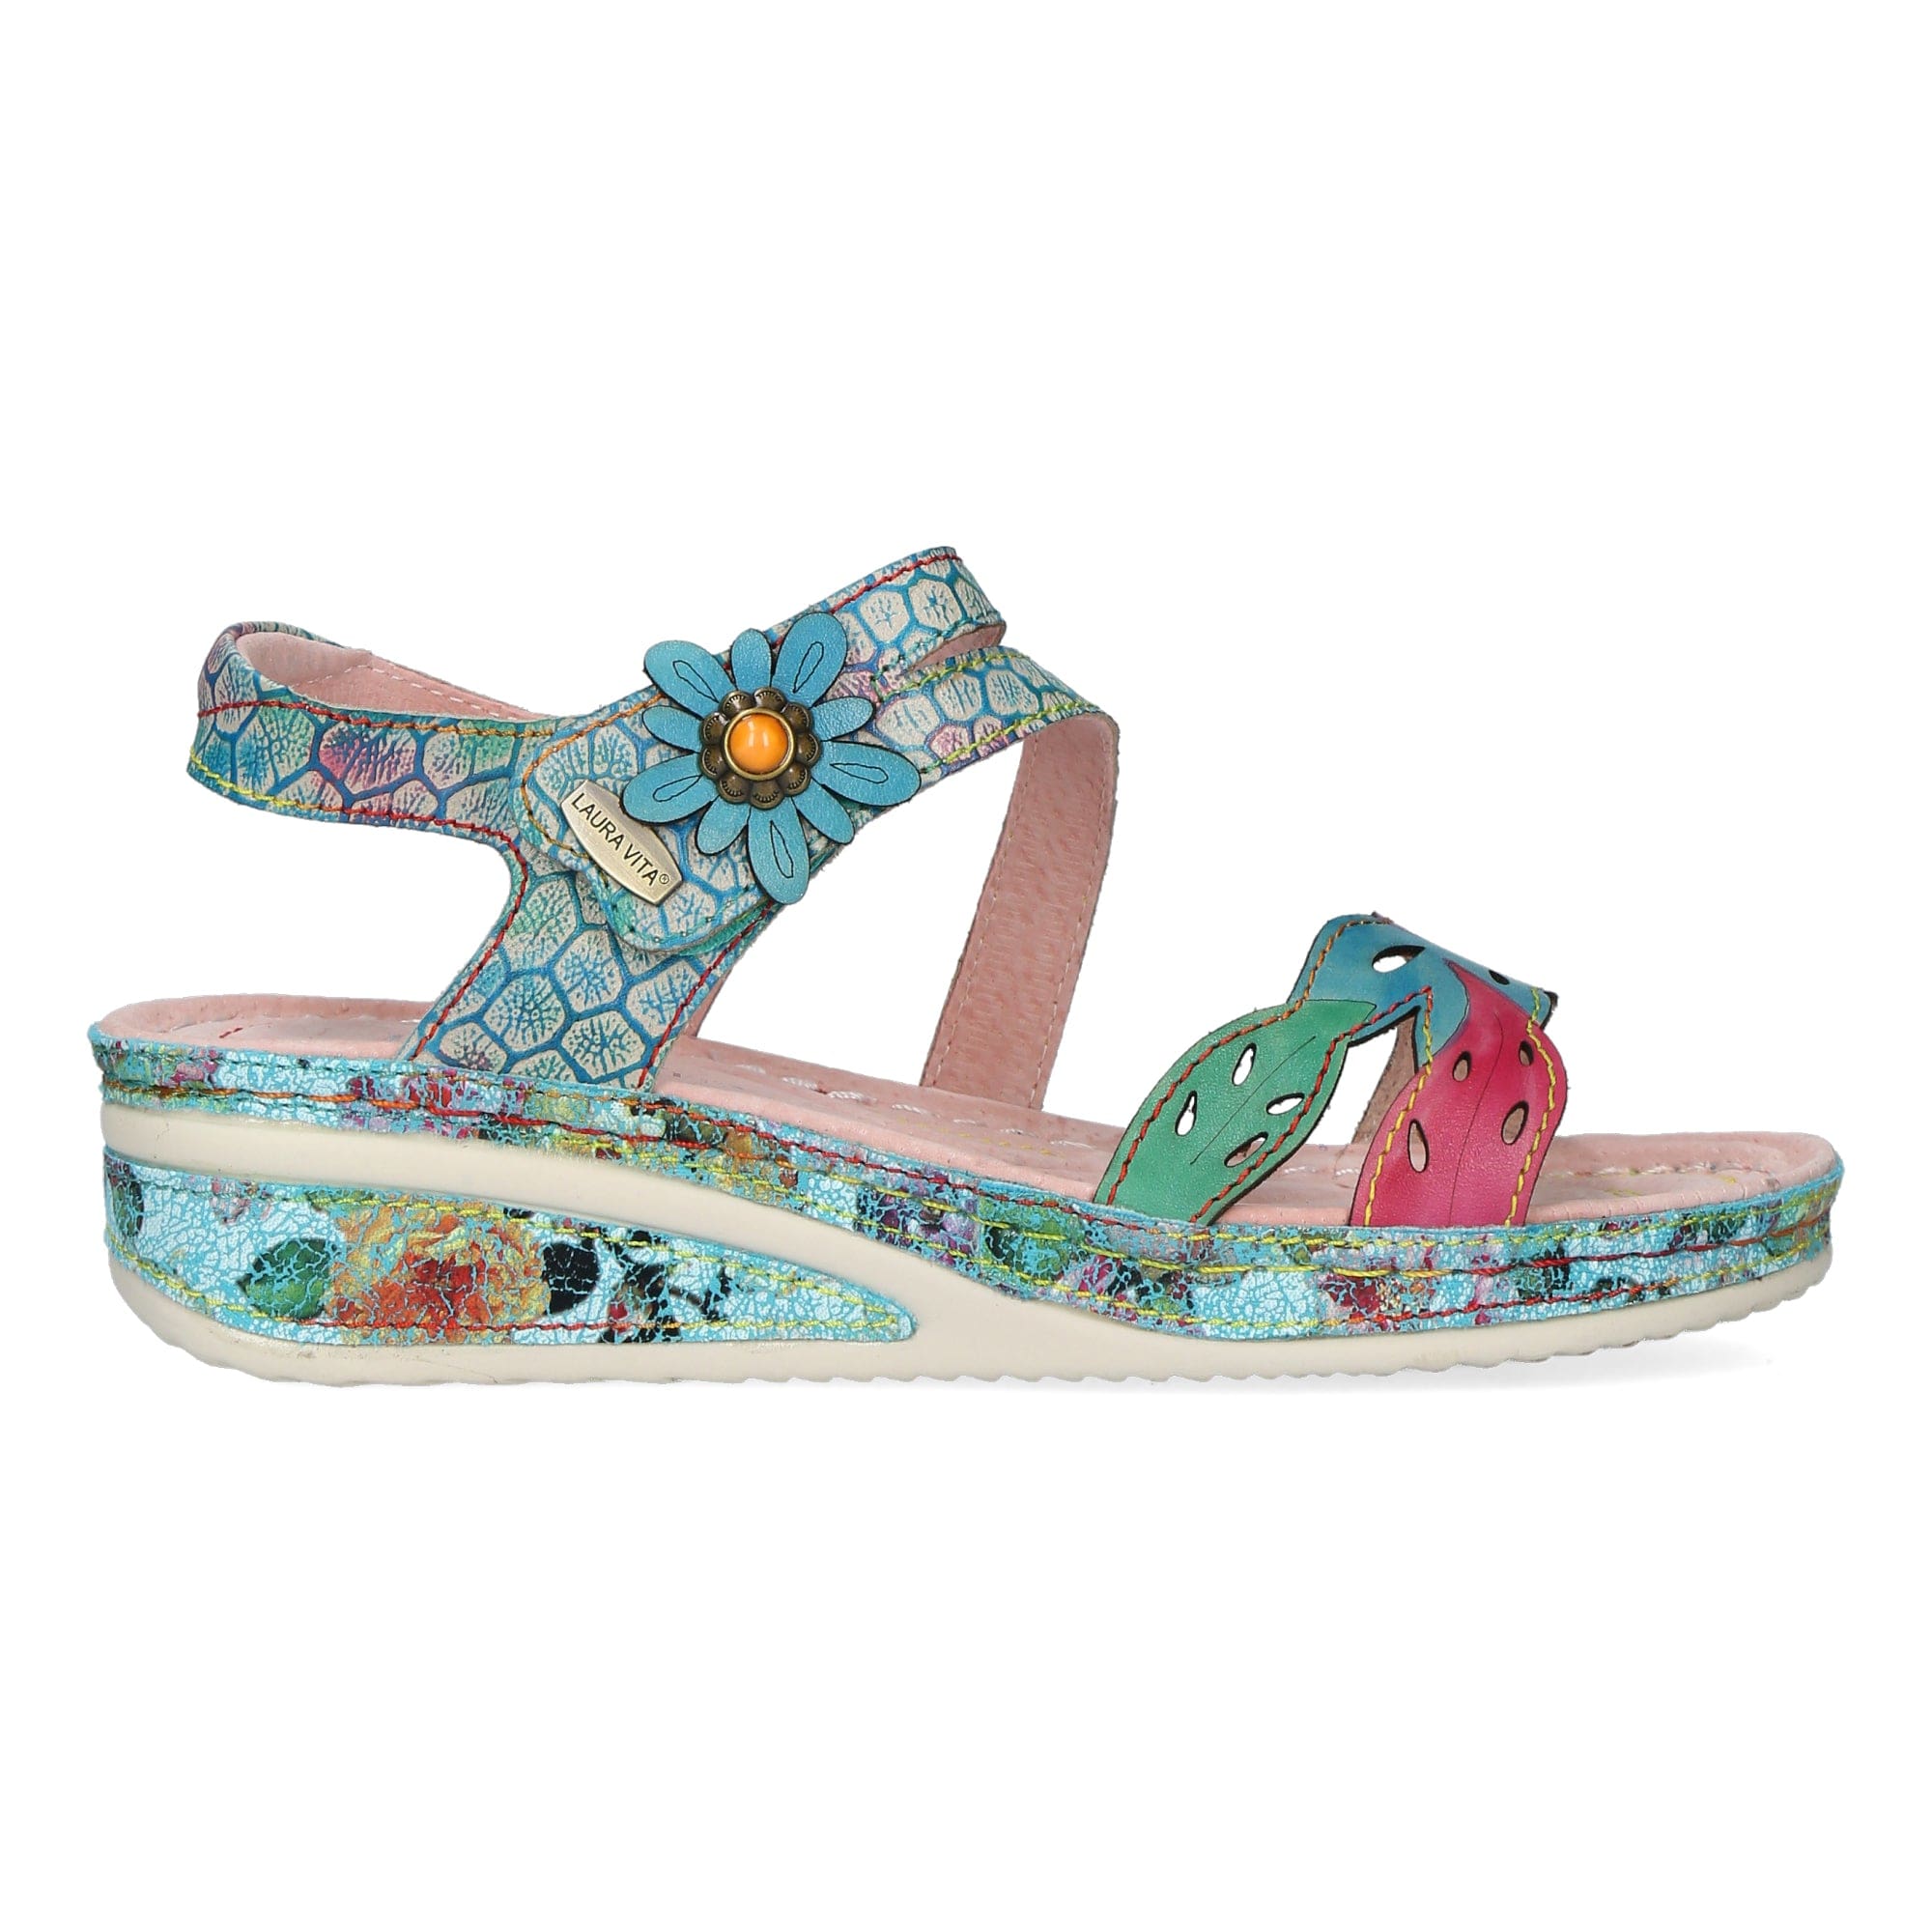 Chaussure JACDISO 48 - 35 / Turquoise - Sandale